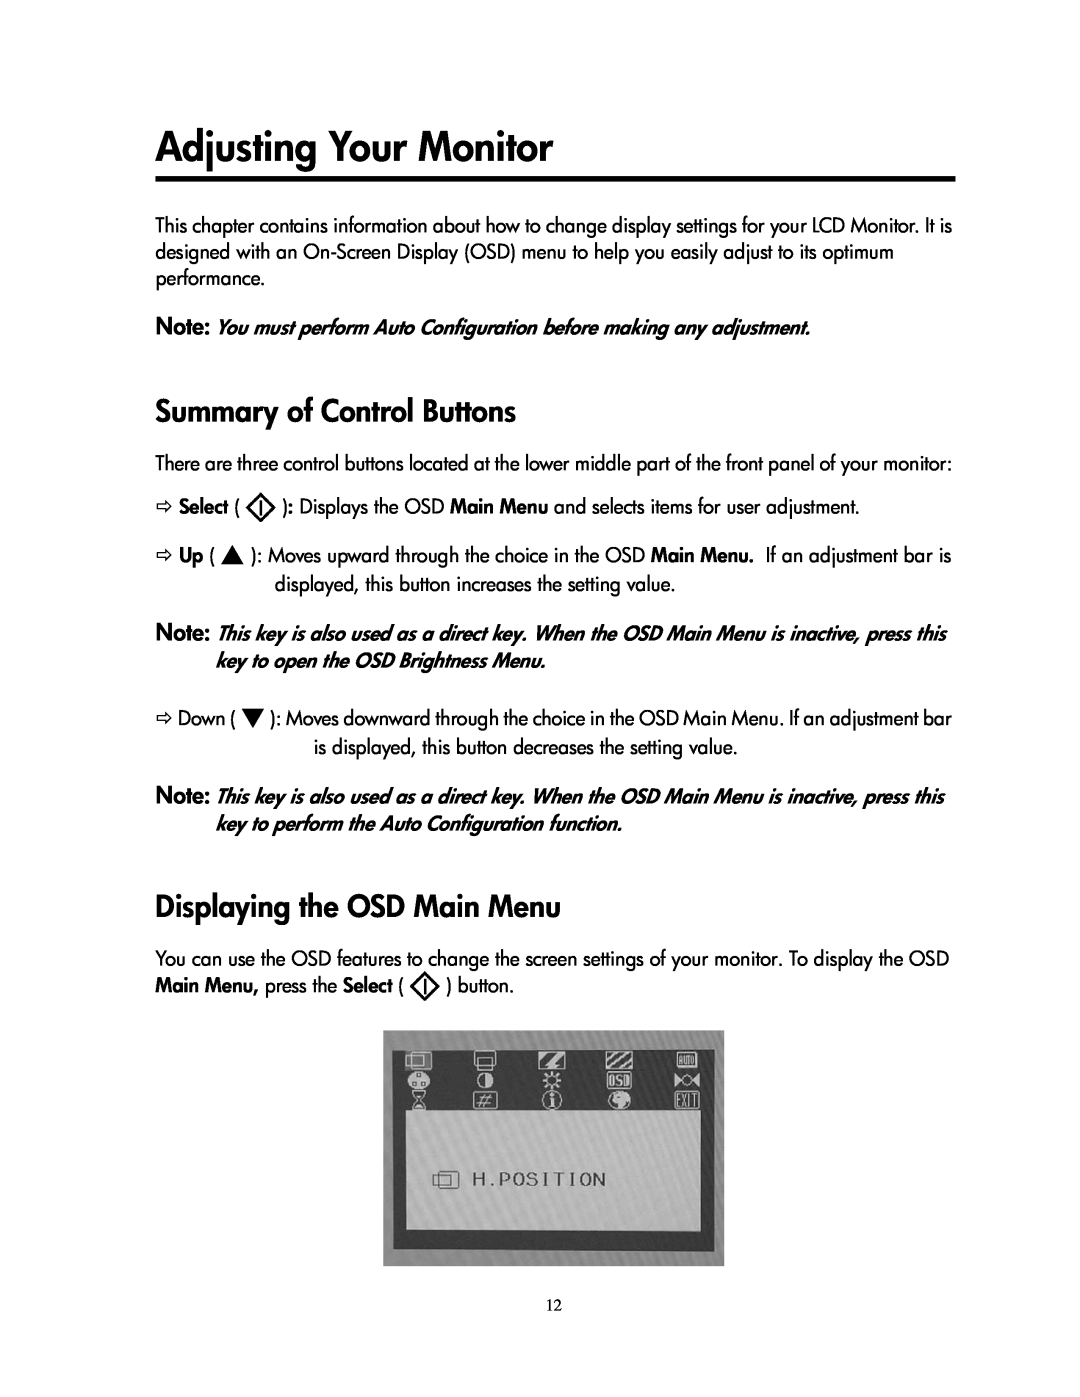 Compaq 1501 manual Adjusting Your Monitor, Summary of Control Buttons, Displaying the OSD Main Menu 